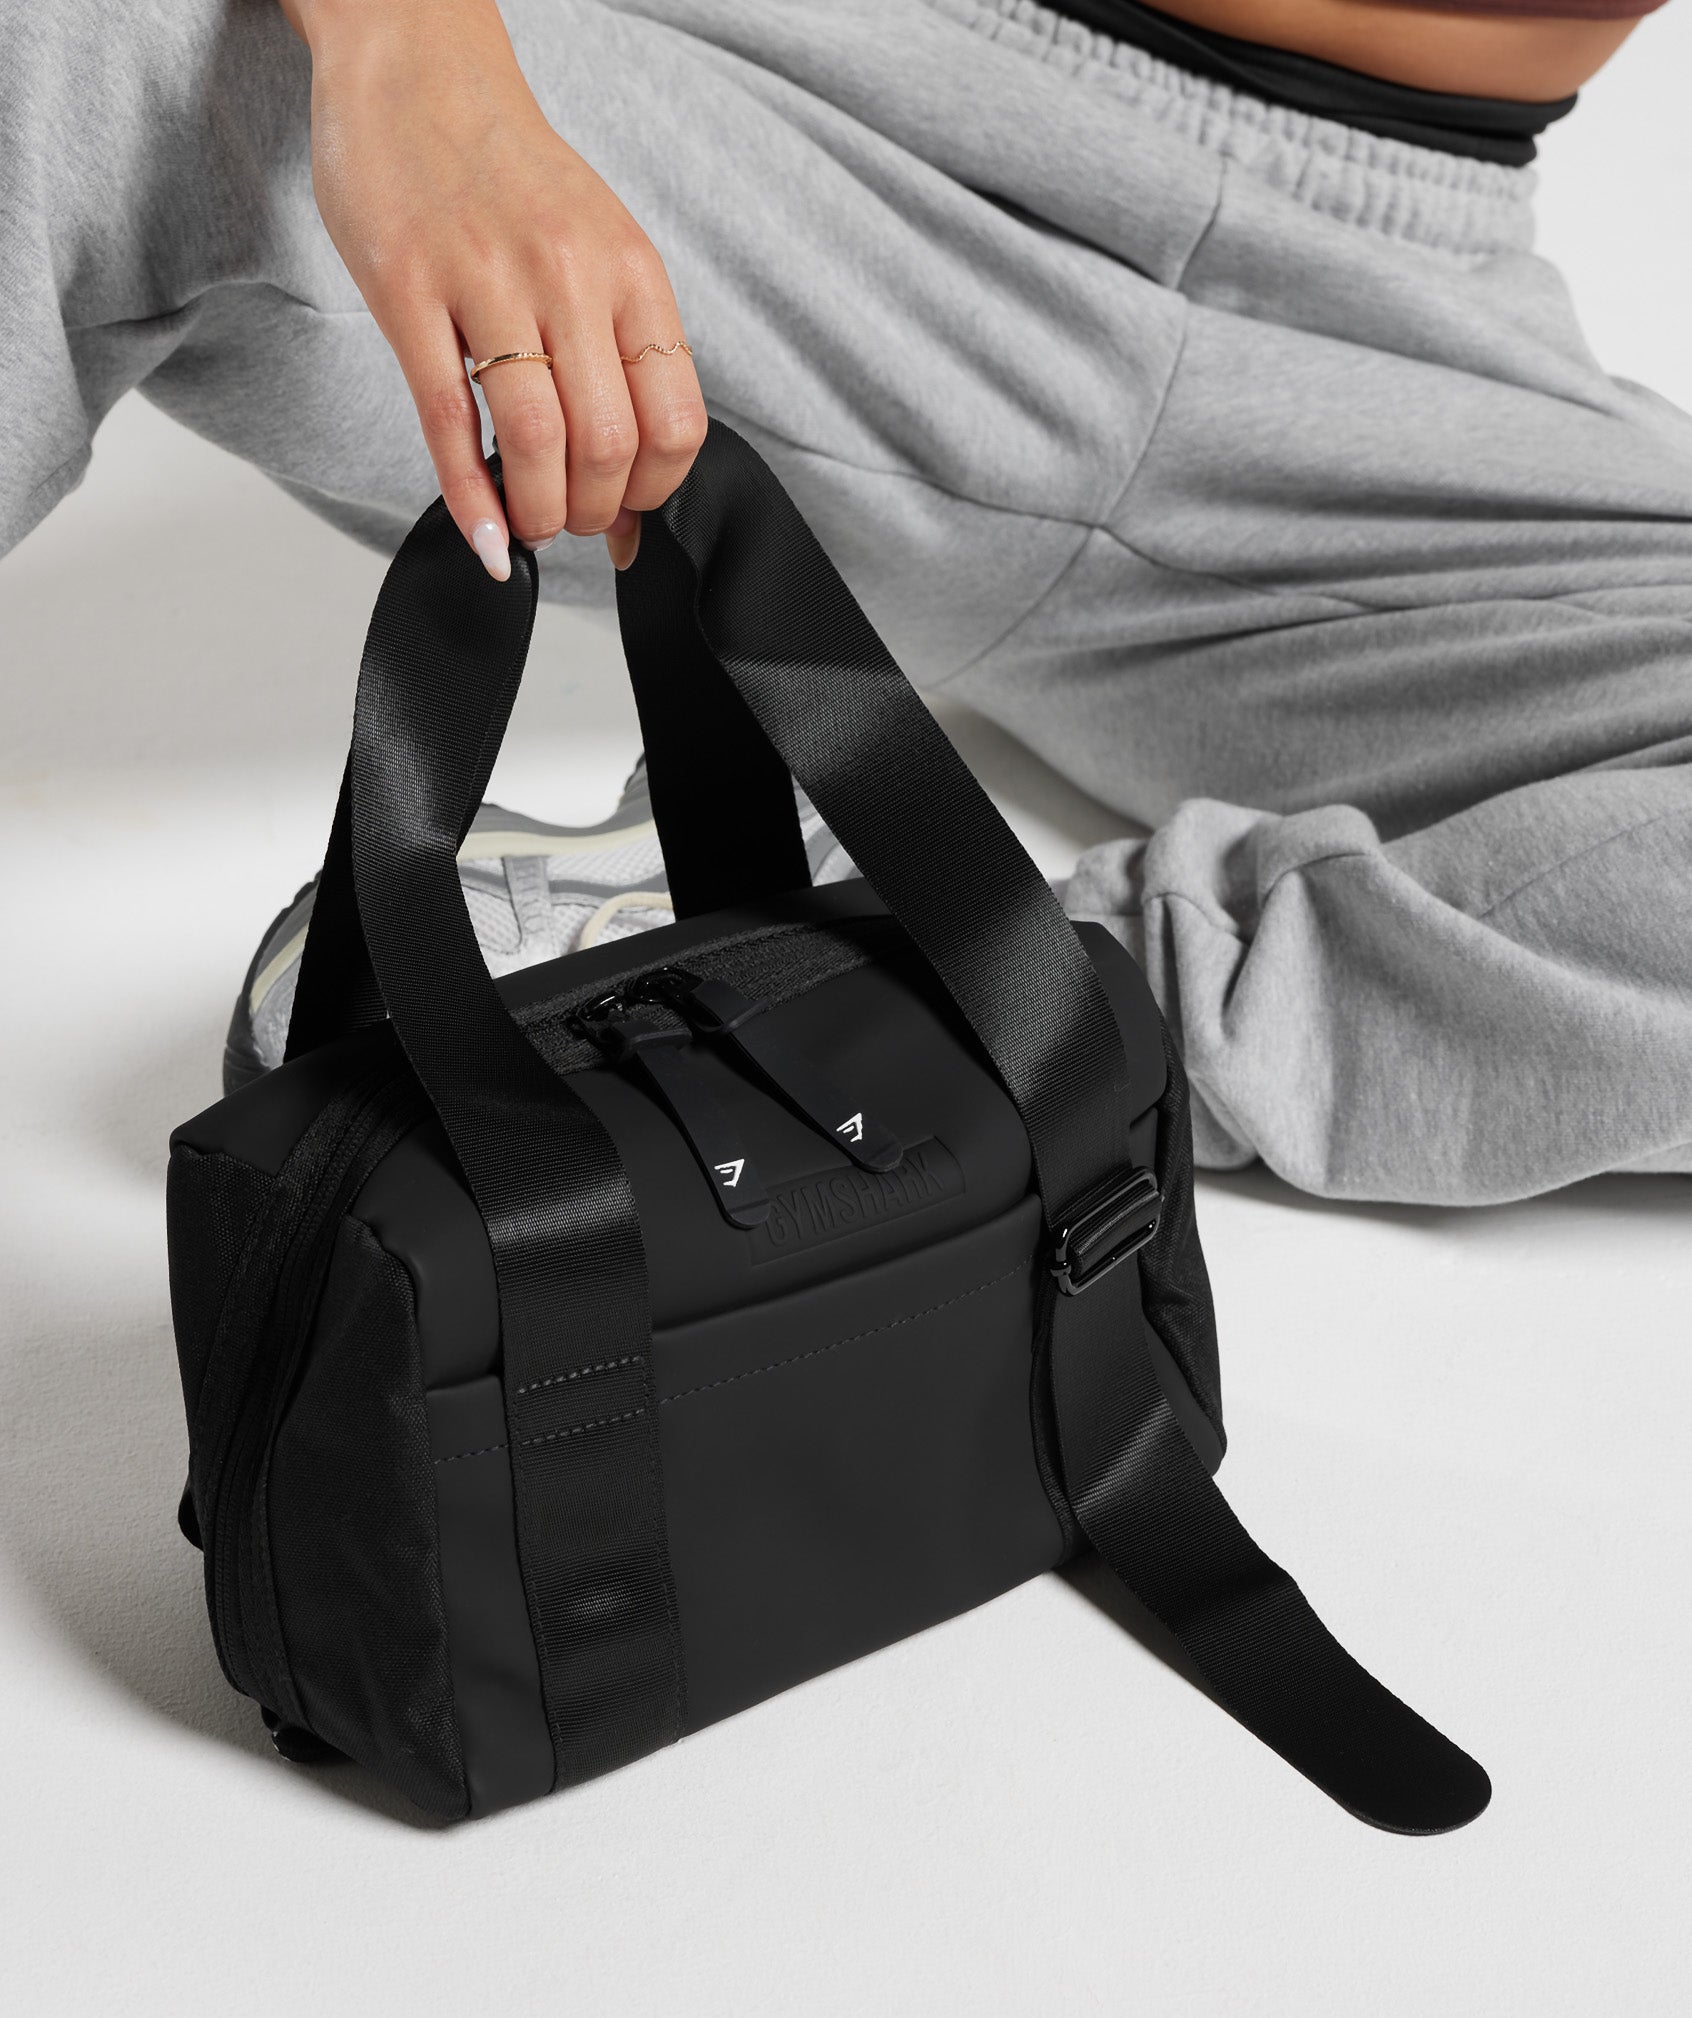 Everyday Mini Gym Bag in Black - view 5